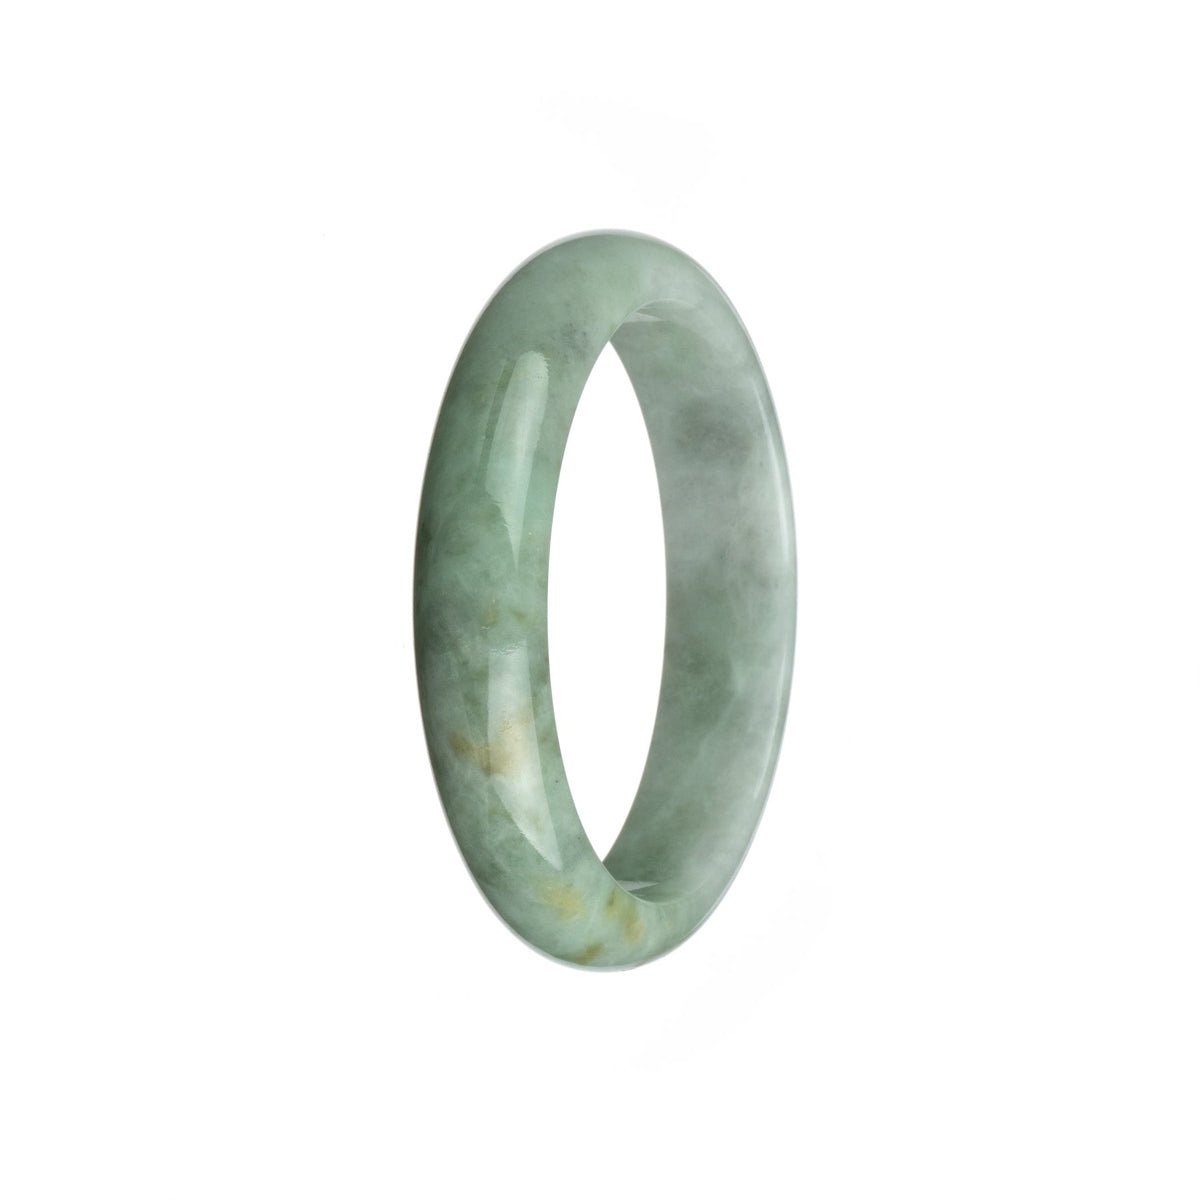 A close-up image of a certified grade A green with white jadeite jade bangle. The bangle has a half-moon shape and measures 56mm in diameter. It is a beautiful piece of jewelry from MAYS GEMS.